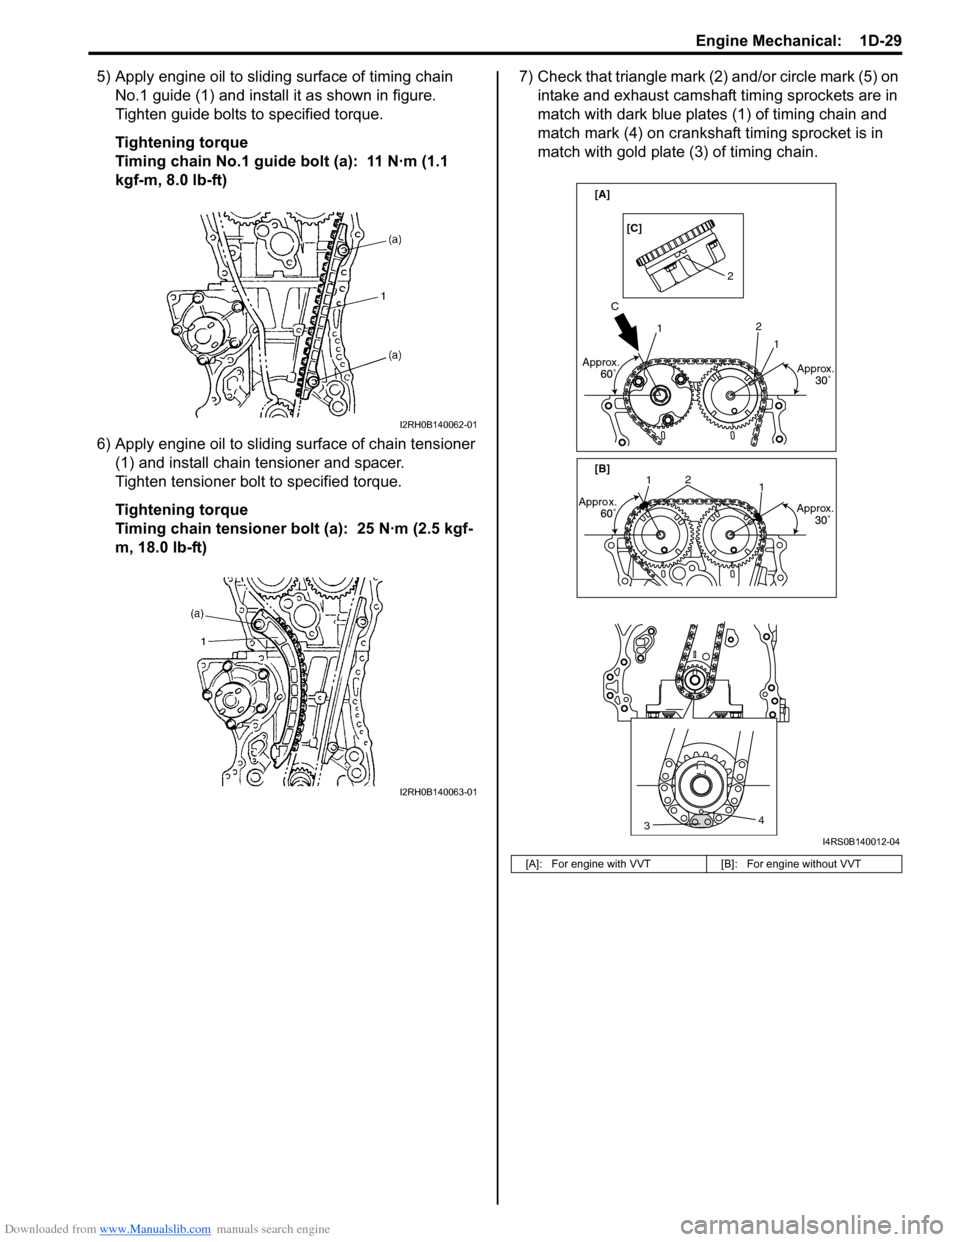 SUZUKI SX4 2006 1.G Service Workshop Manual Downloaded from www.Manualslib.com manuals search engine Engine Mechanical:  1D-29
5) Apply engine oil to sliding surface of timing chain 
No.1 guide (1) and install it as shown in figure.
Tighten gui